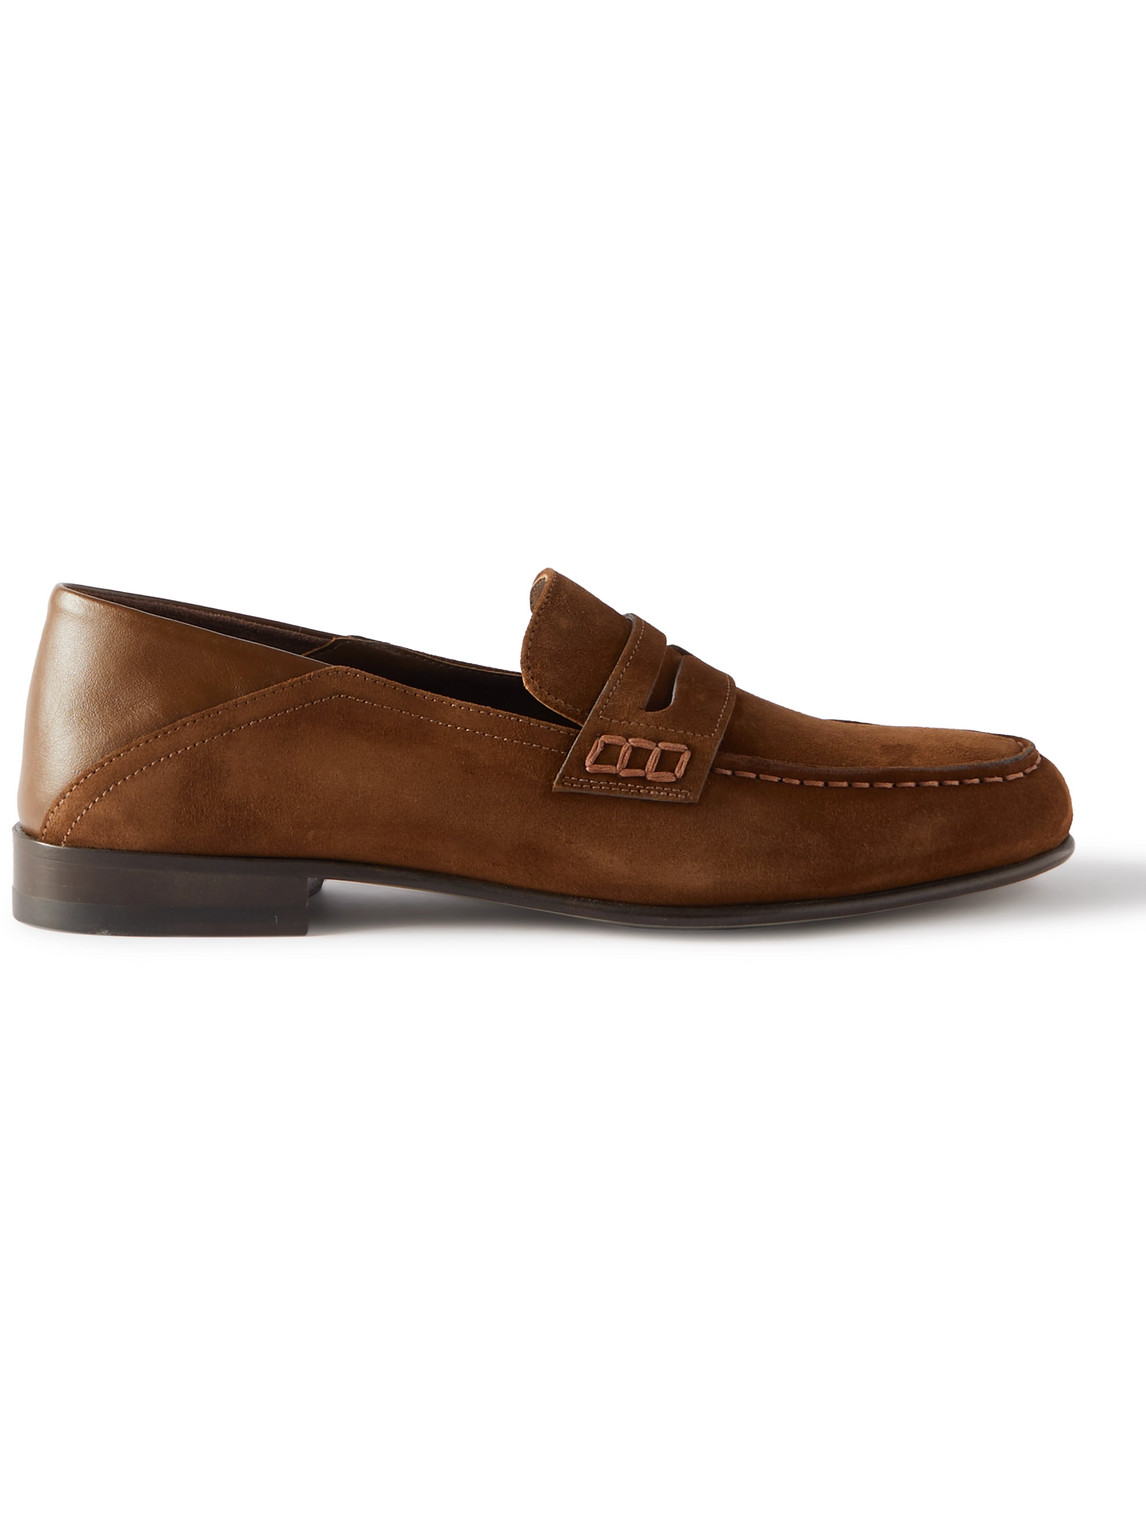 Plymouth Collapsible-Heel Suede and Leather Penny Loafers